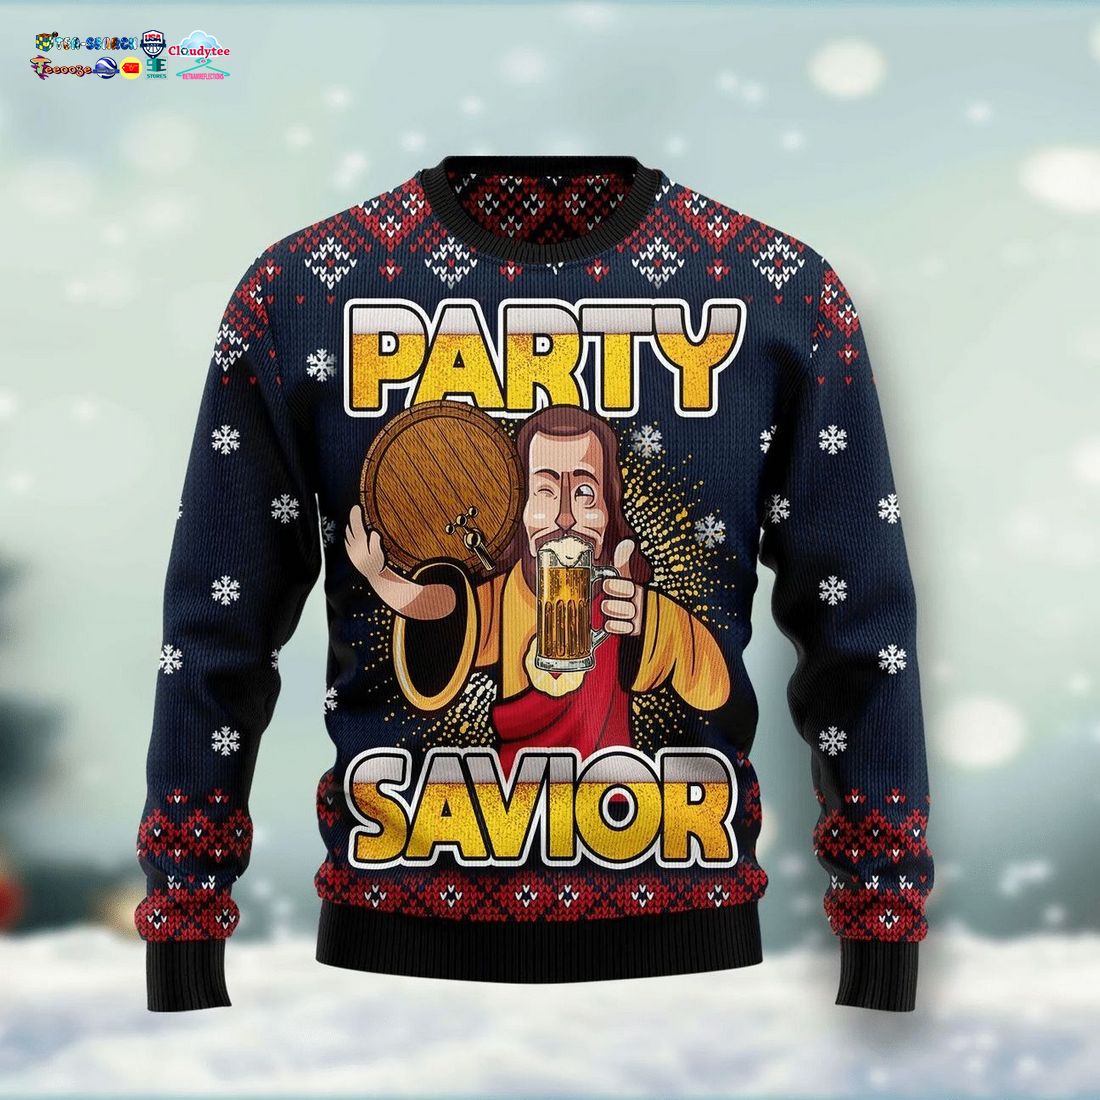 Jesus Beer Party Savior Ugly Christmas Sweater - Impressive picture.